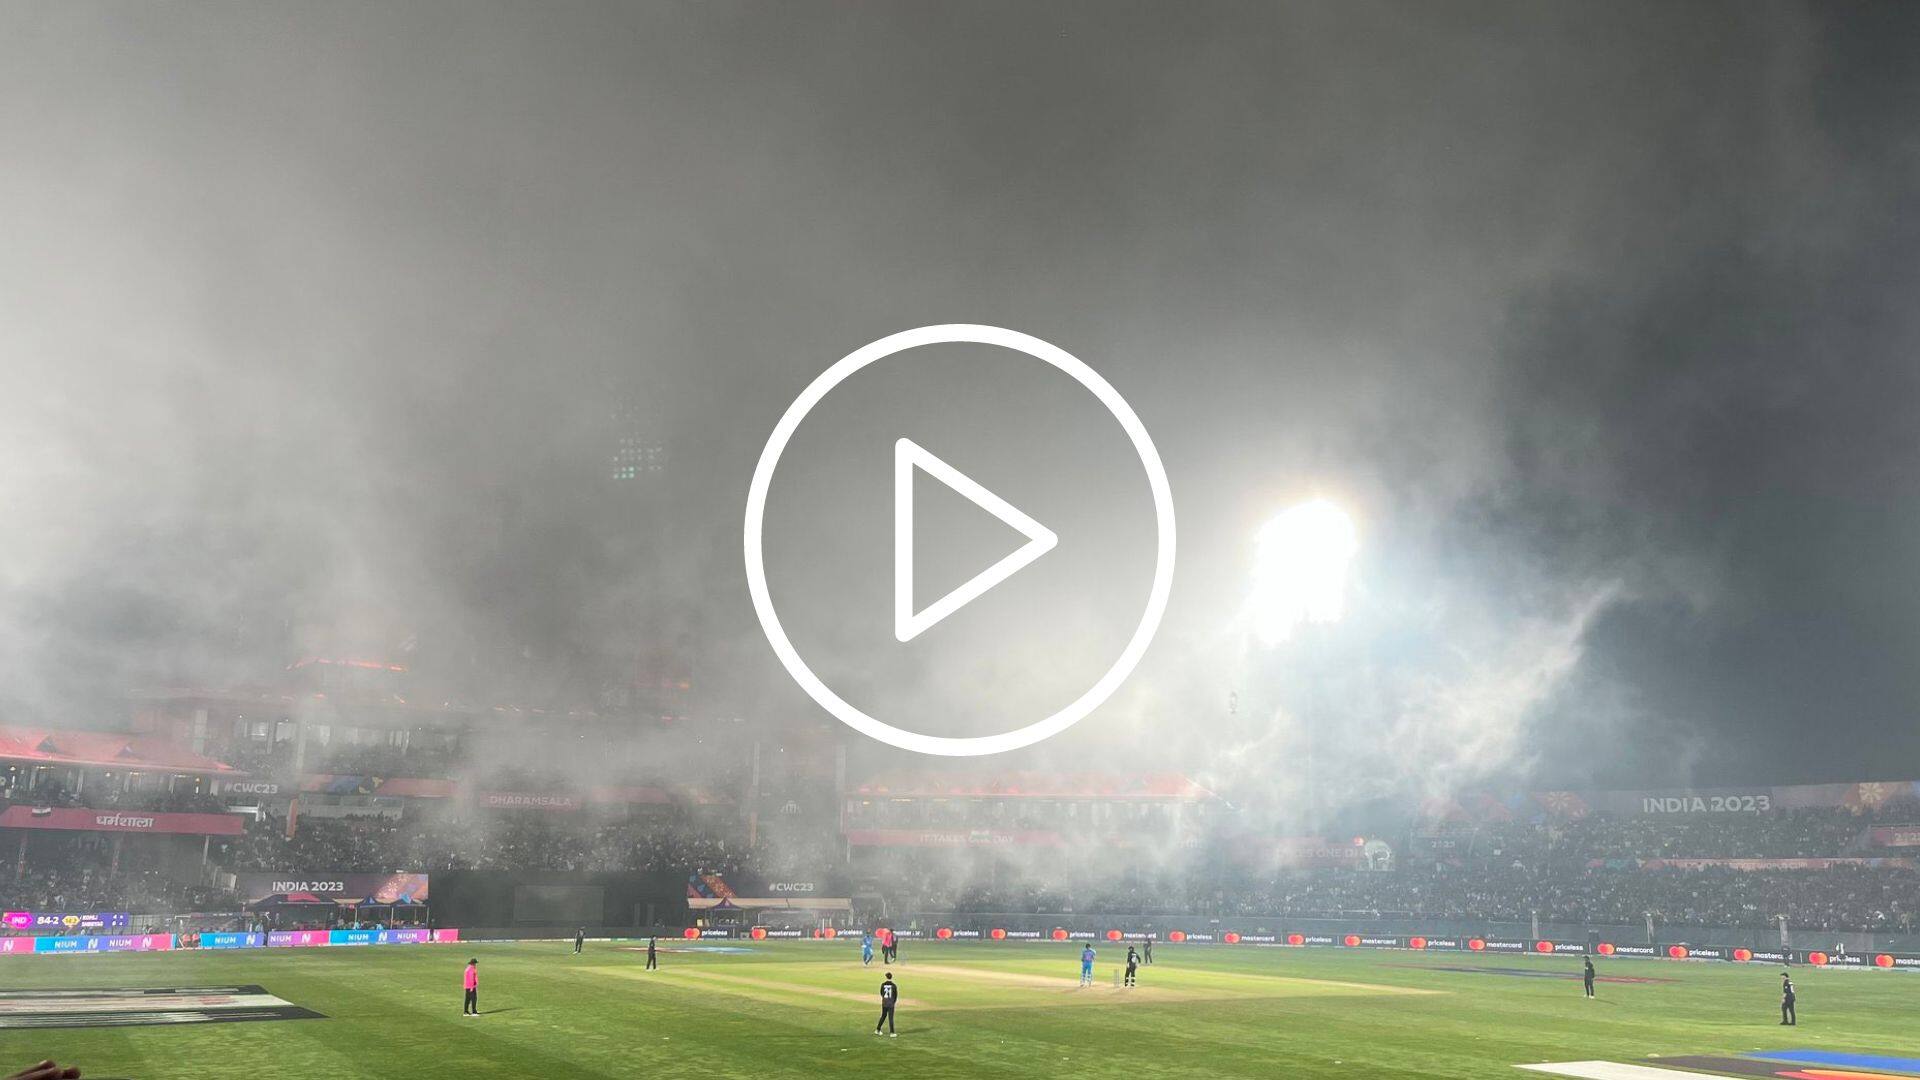 [Watch] Heavy Fog Interrupts Ind vs NZ World Cup Match In Dharamsala; Match Stopped